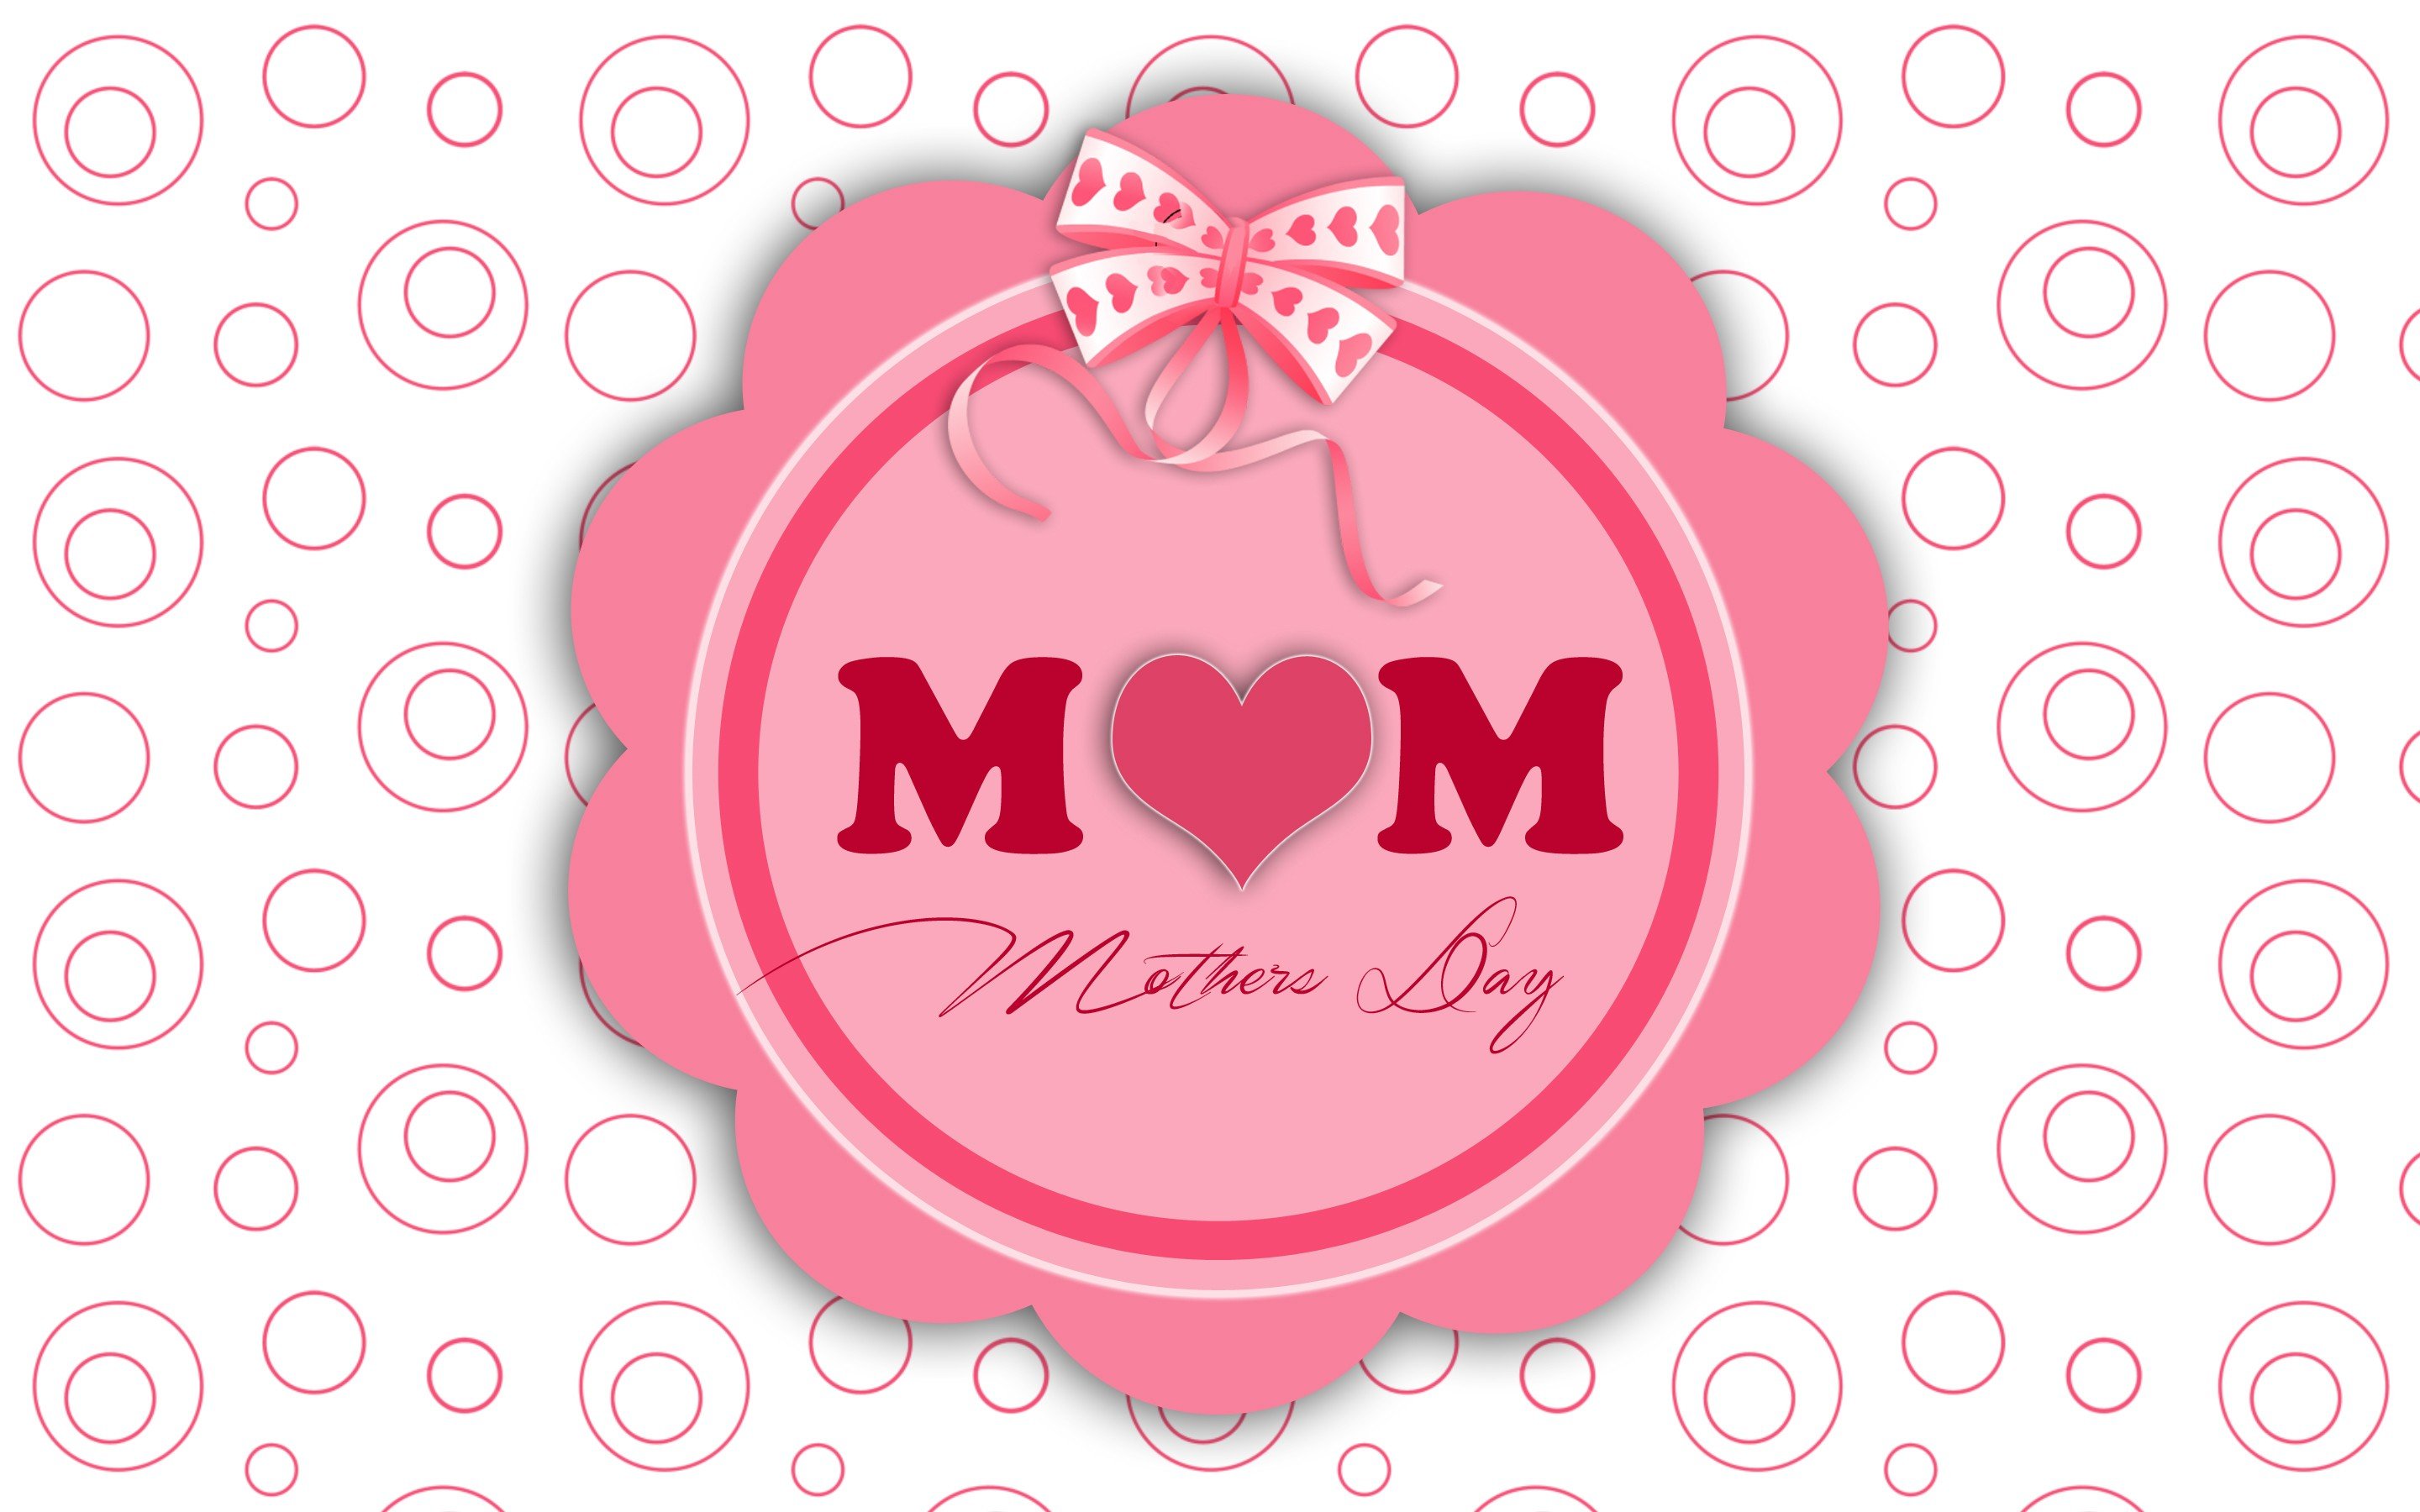 mothers, Day, Mother, Mom, Holiday Wallpaper